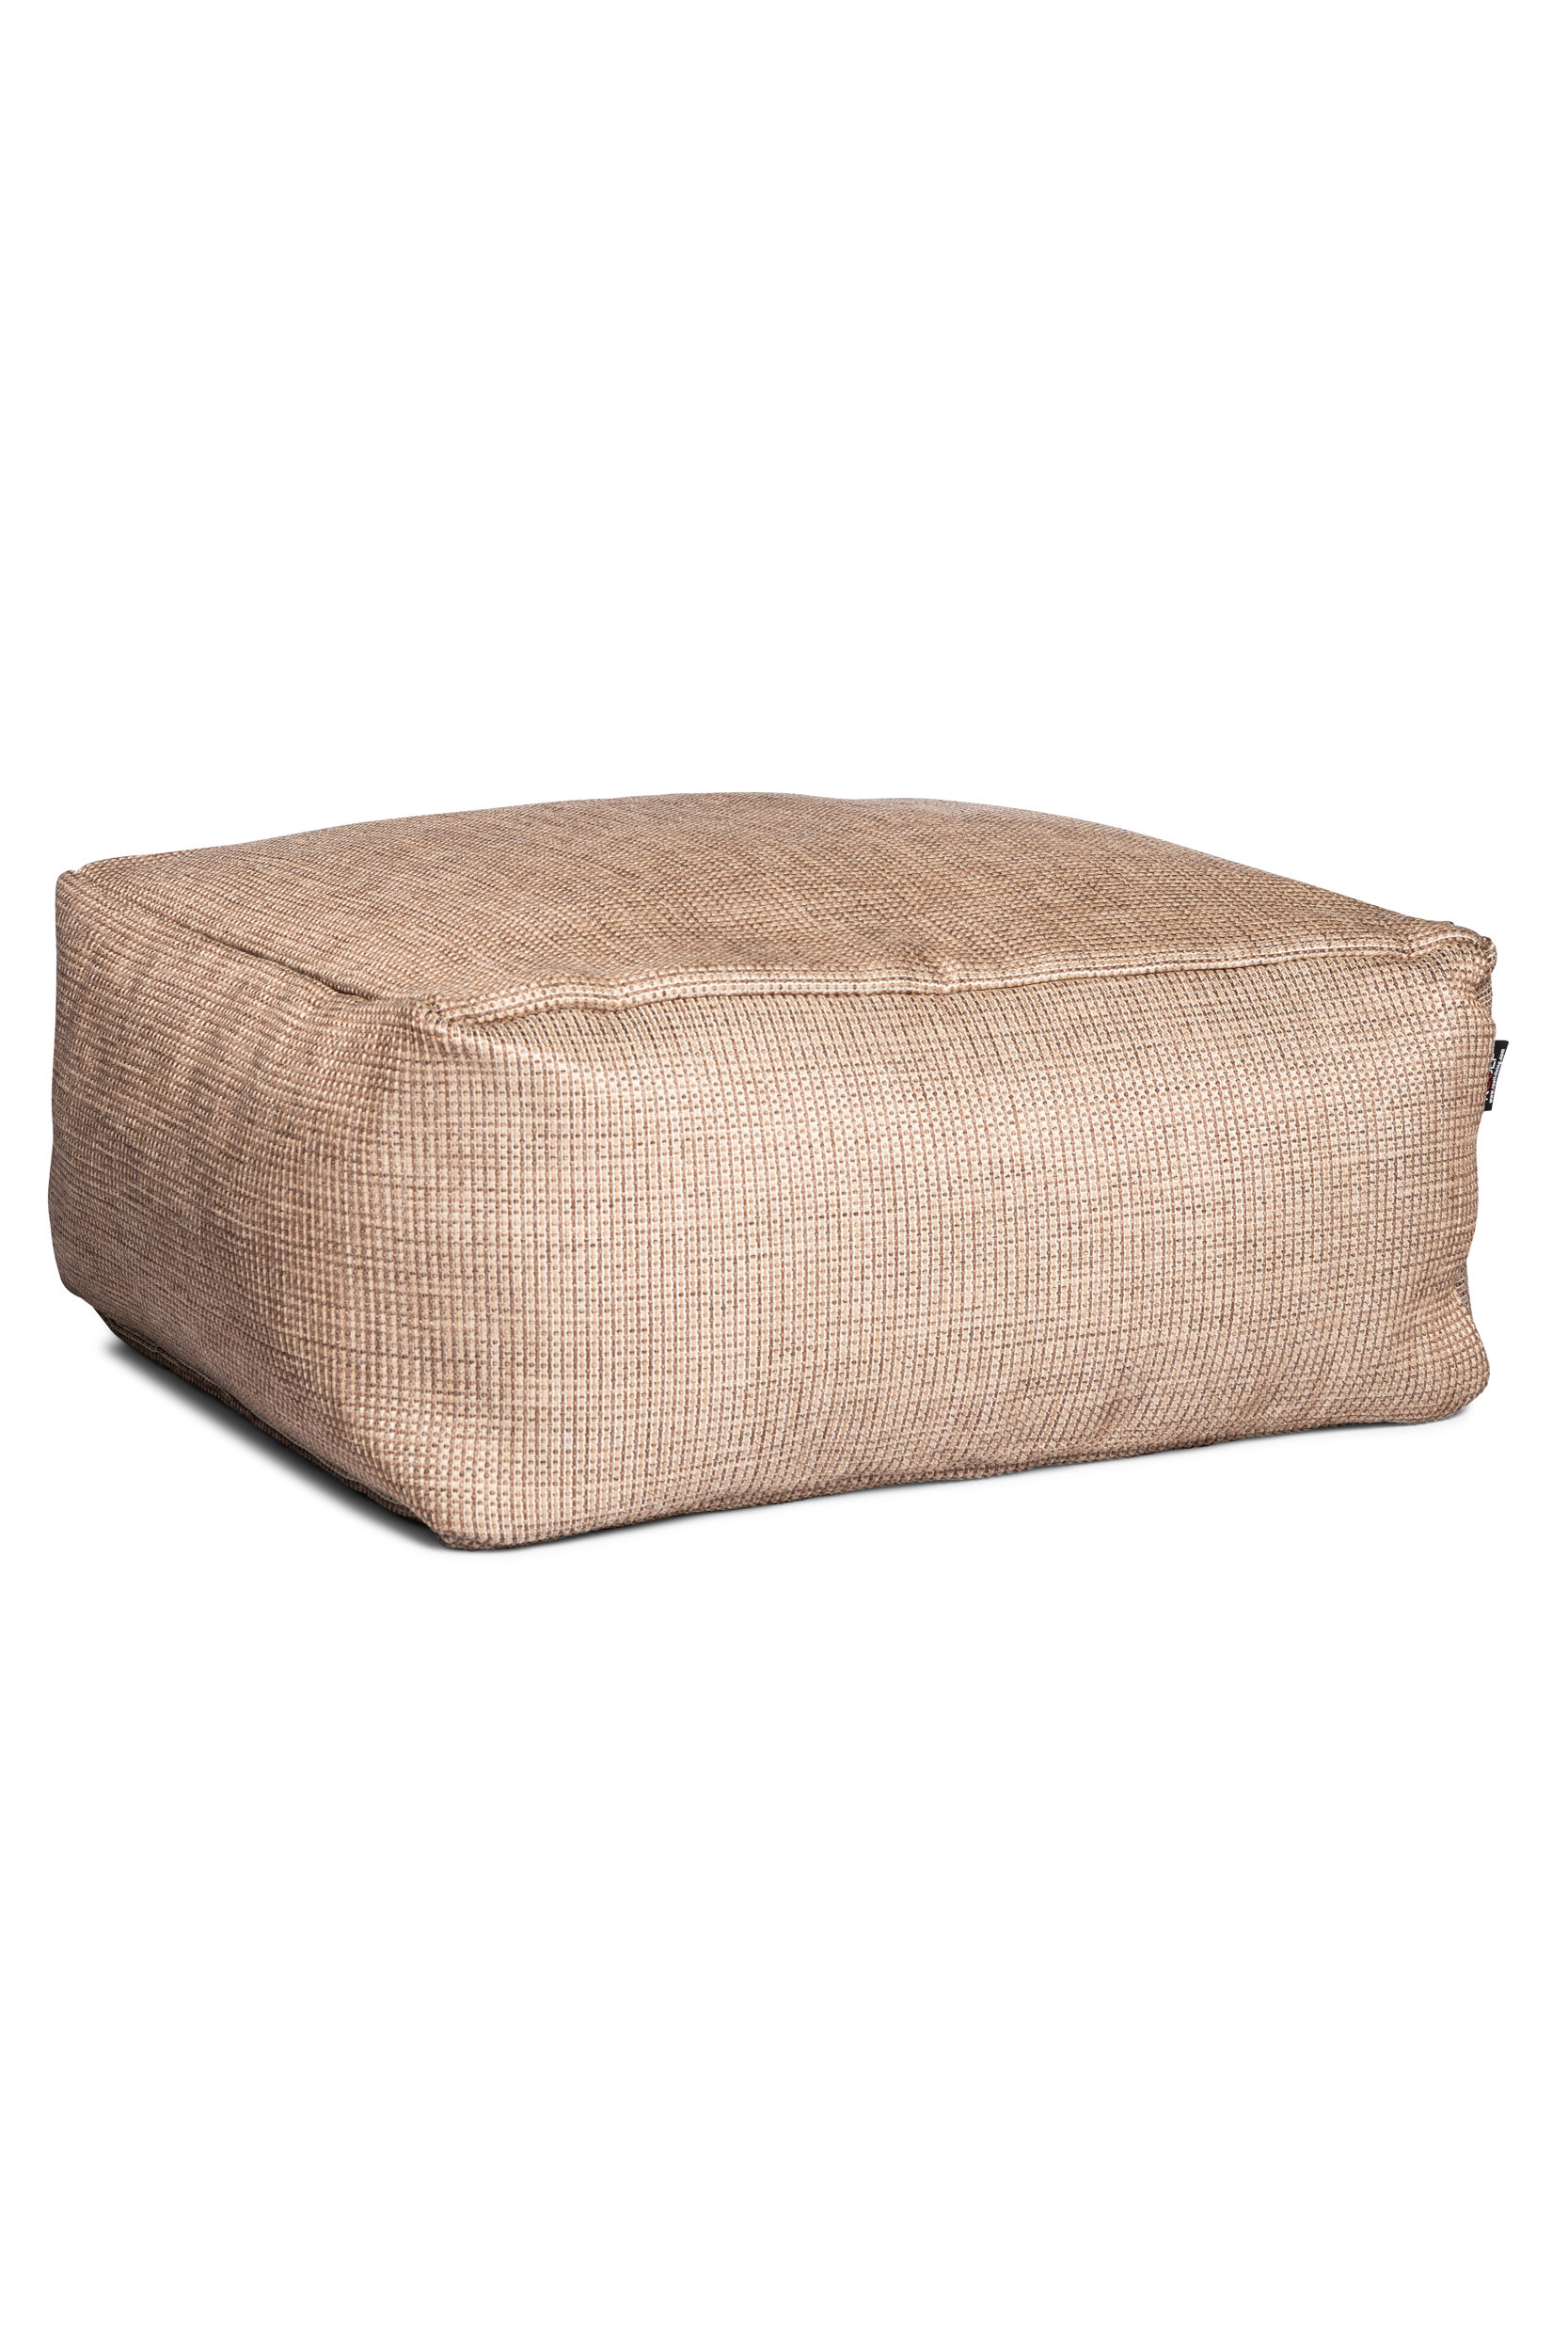 Roolf Outdoor Living Dotty Pouf Small Gold Side